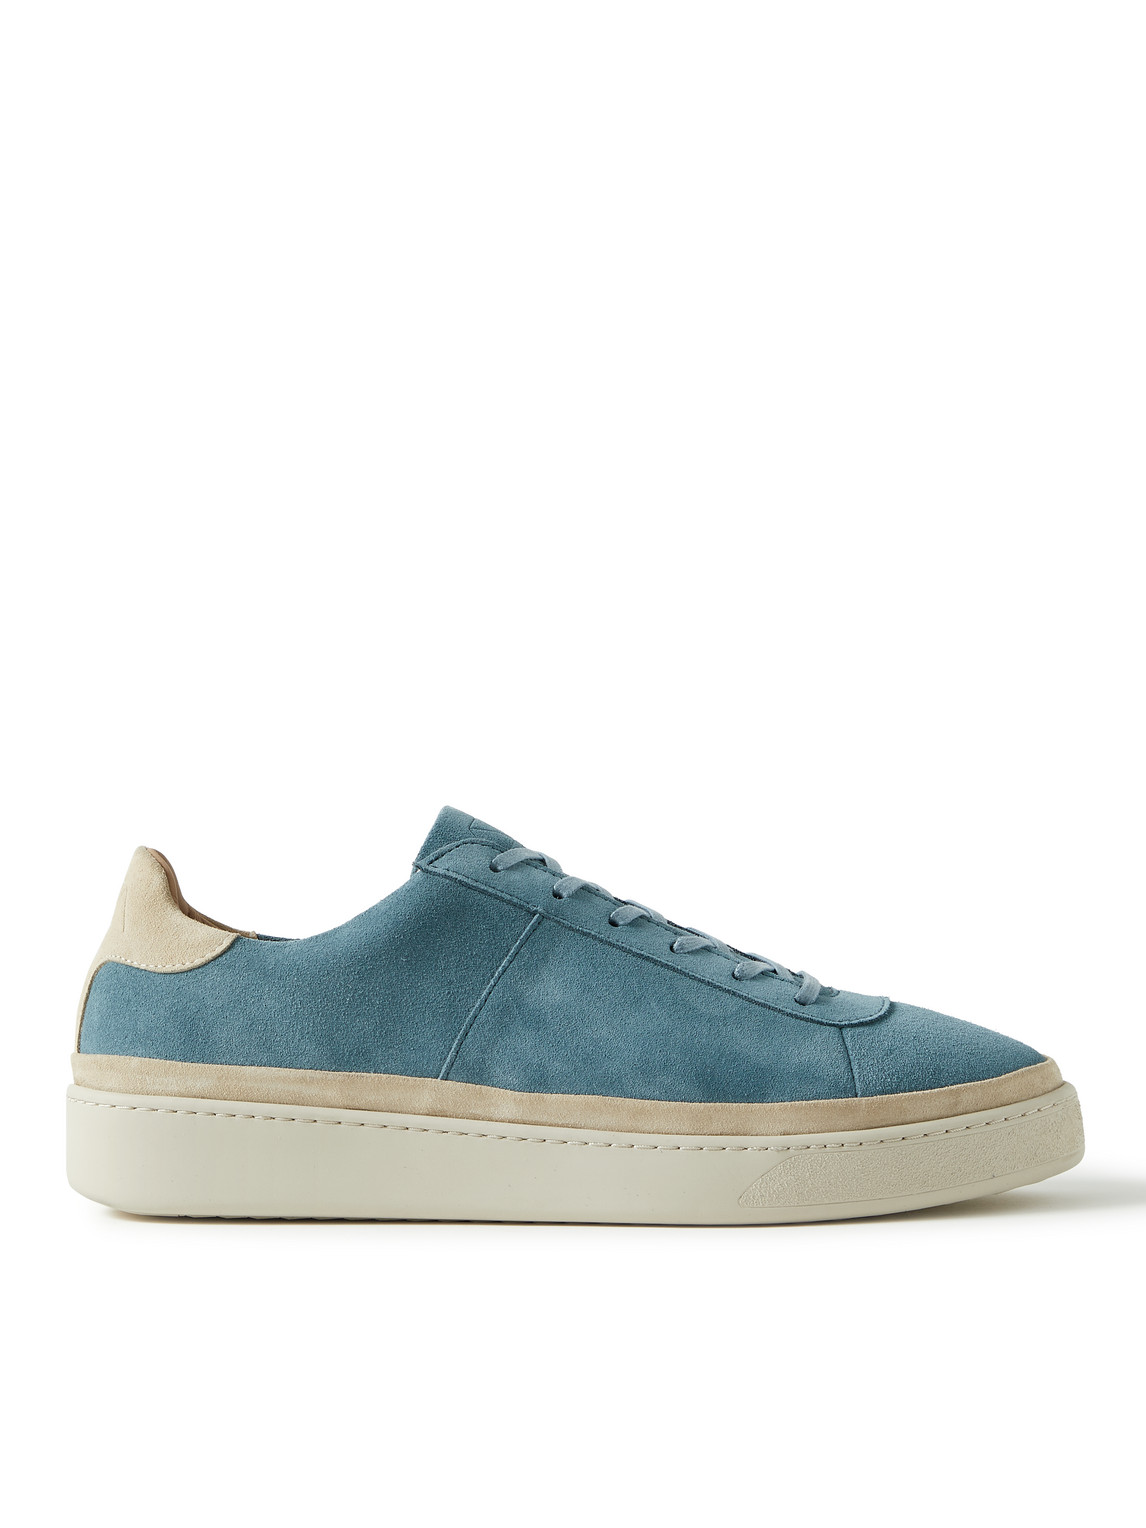 Two-Tone Suede Sneakers